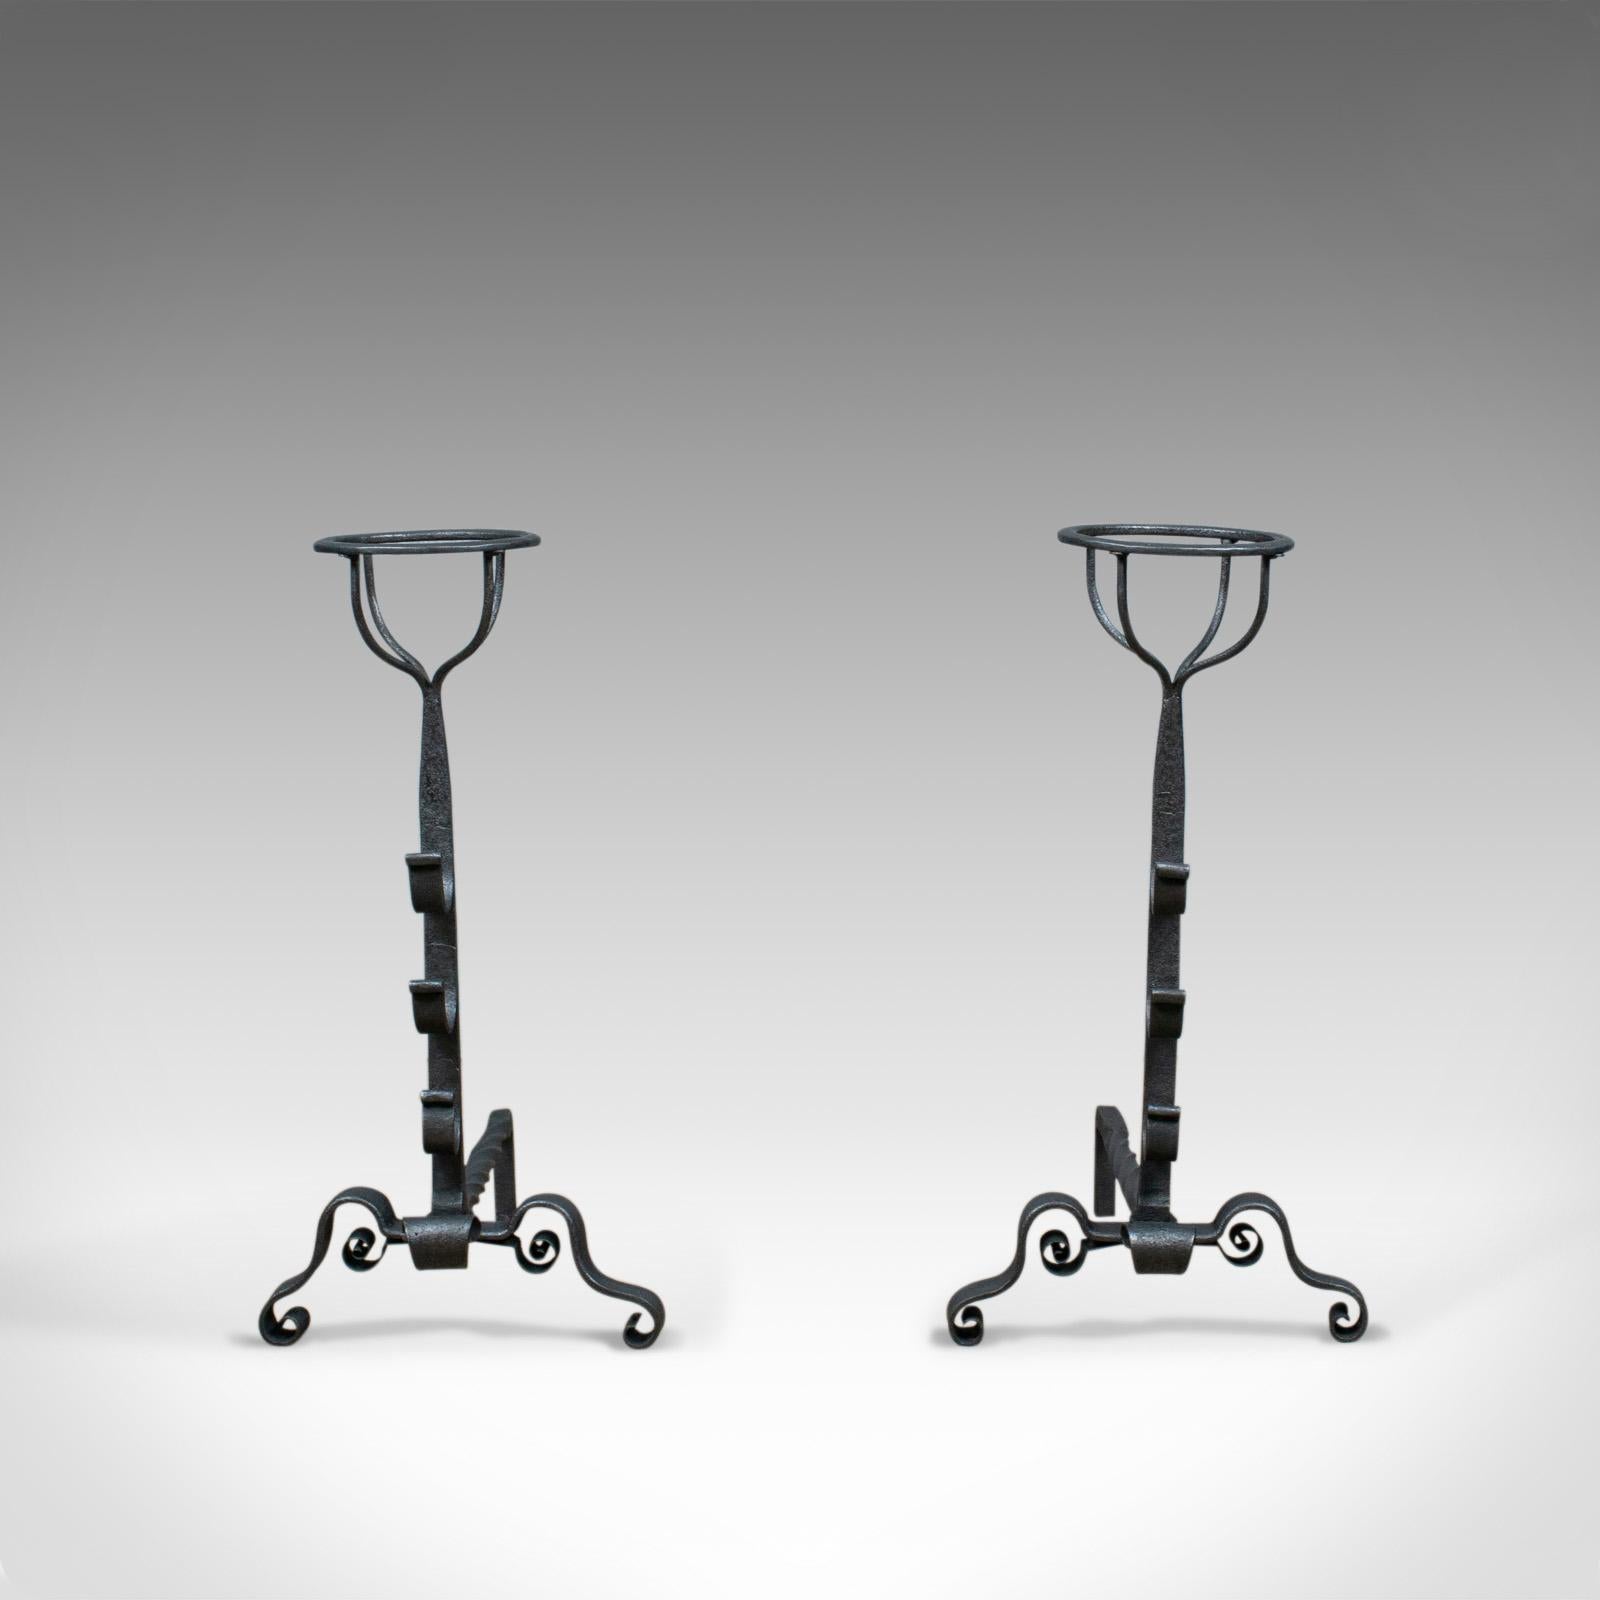 This is an antique pair of firedogs. English, medieval revival andirons forged in the early 20th century, circa 1900.

Bold andirons ideal for a large fire basket
Standing upon a scrolled arch leg
Medieval revival in taste
Featuring three spit